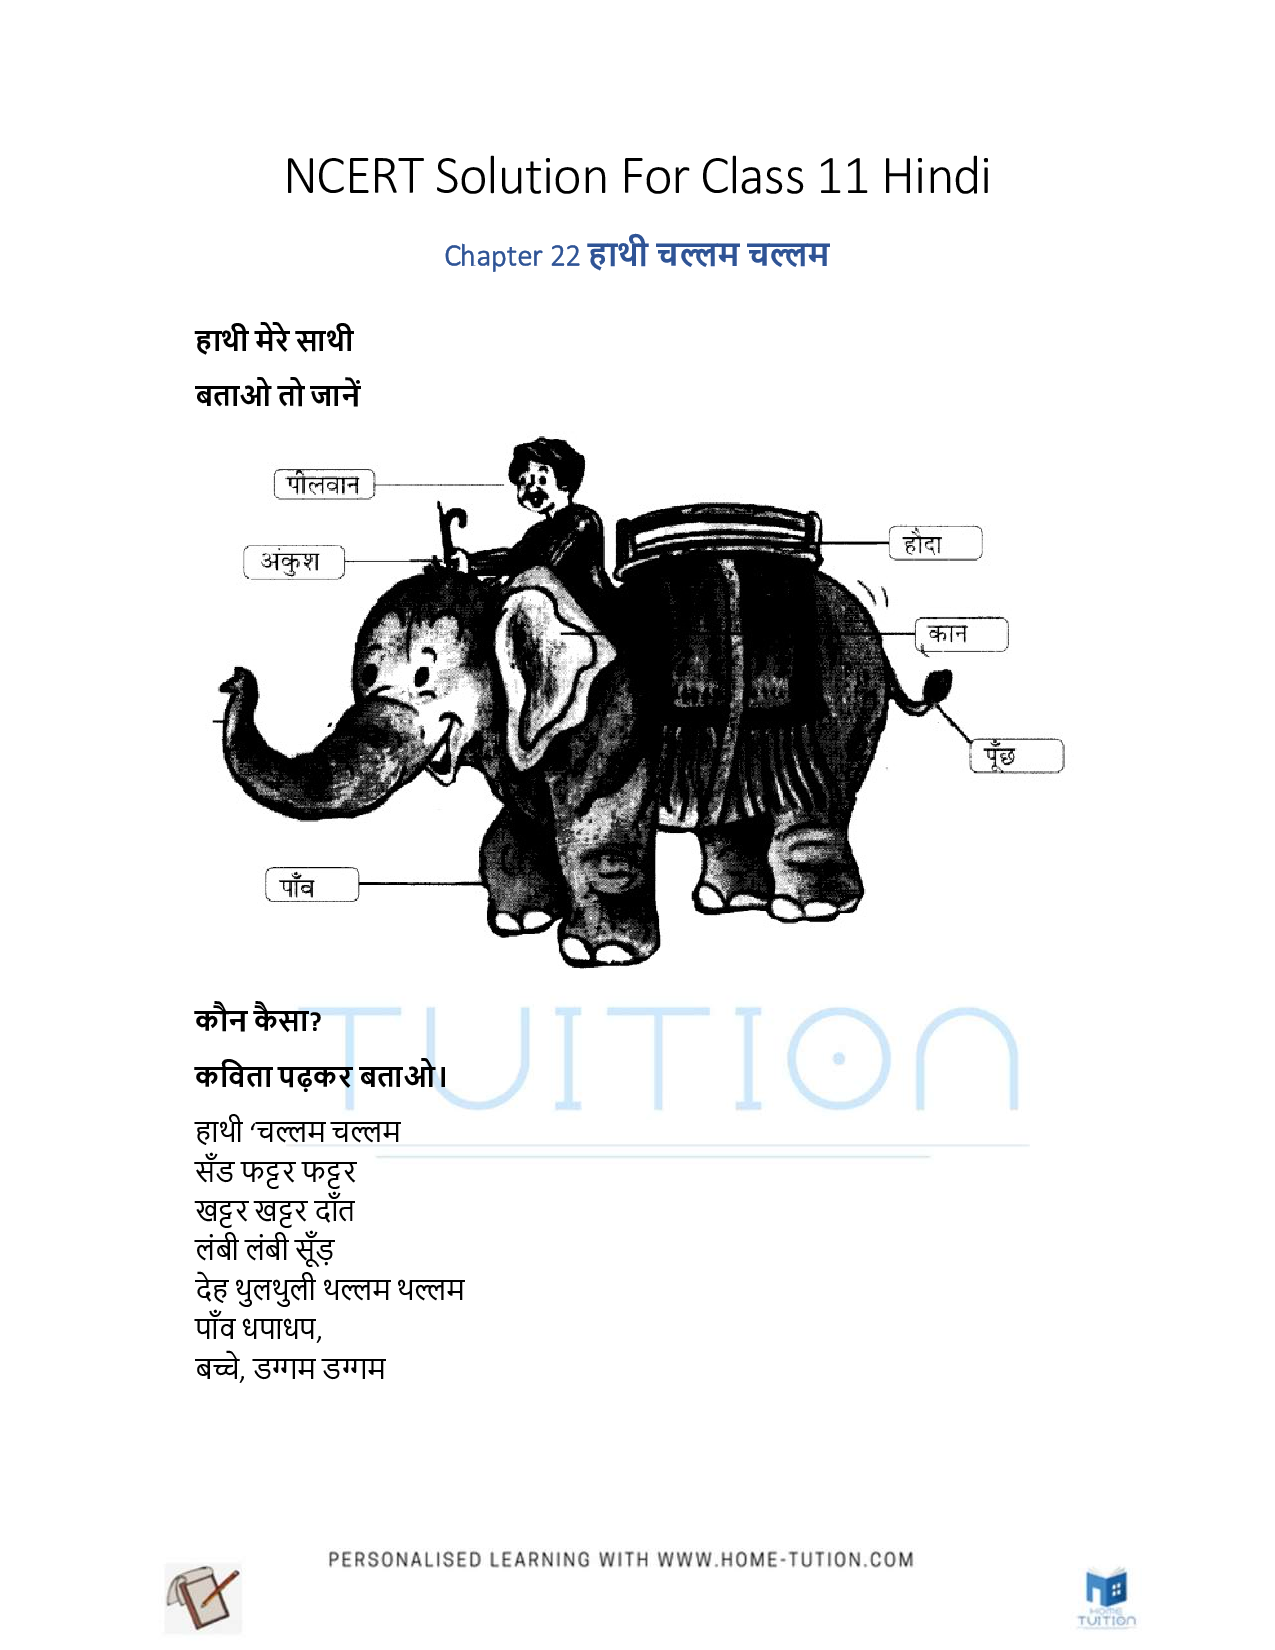 NCERT Solution for Class 1 Hindi Chapter 22 Hathi Chalam Chalam (हाथी-चल्लम-चल्लम)